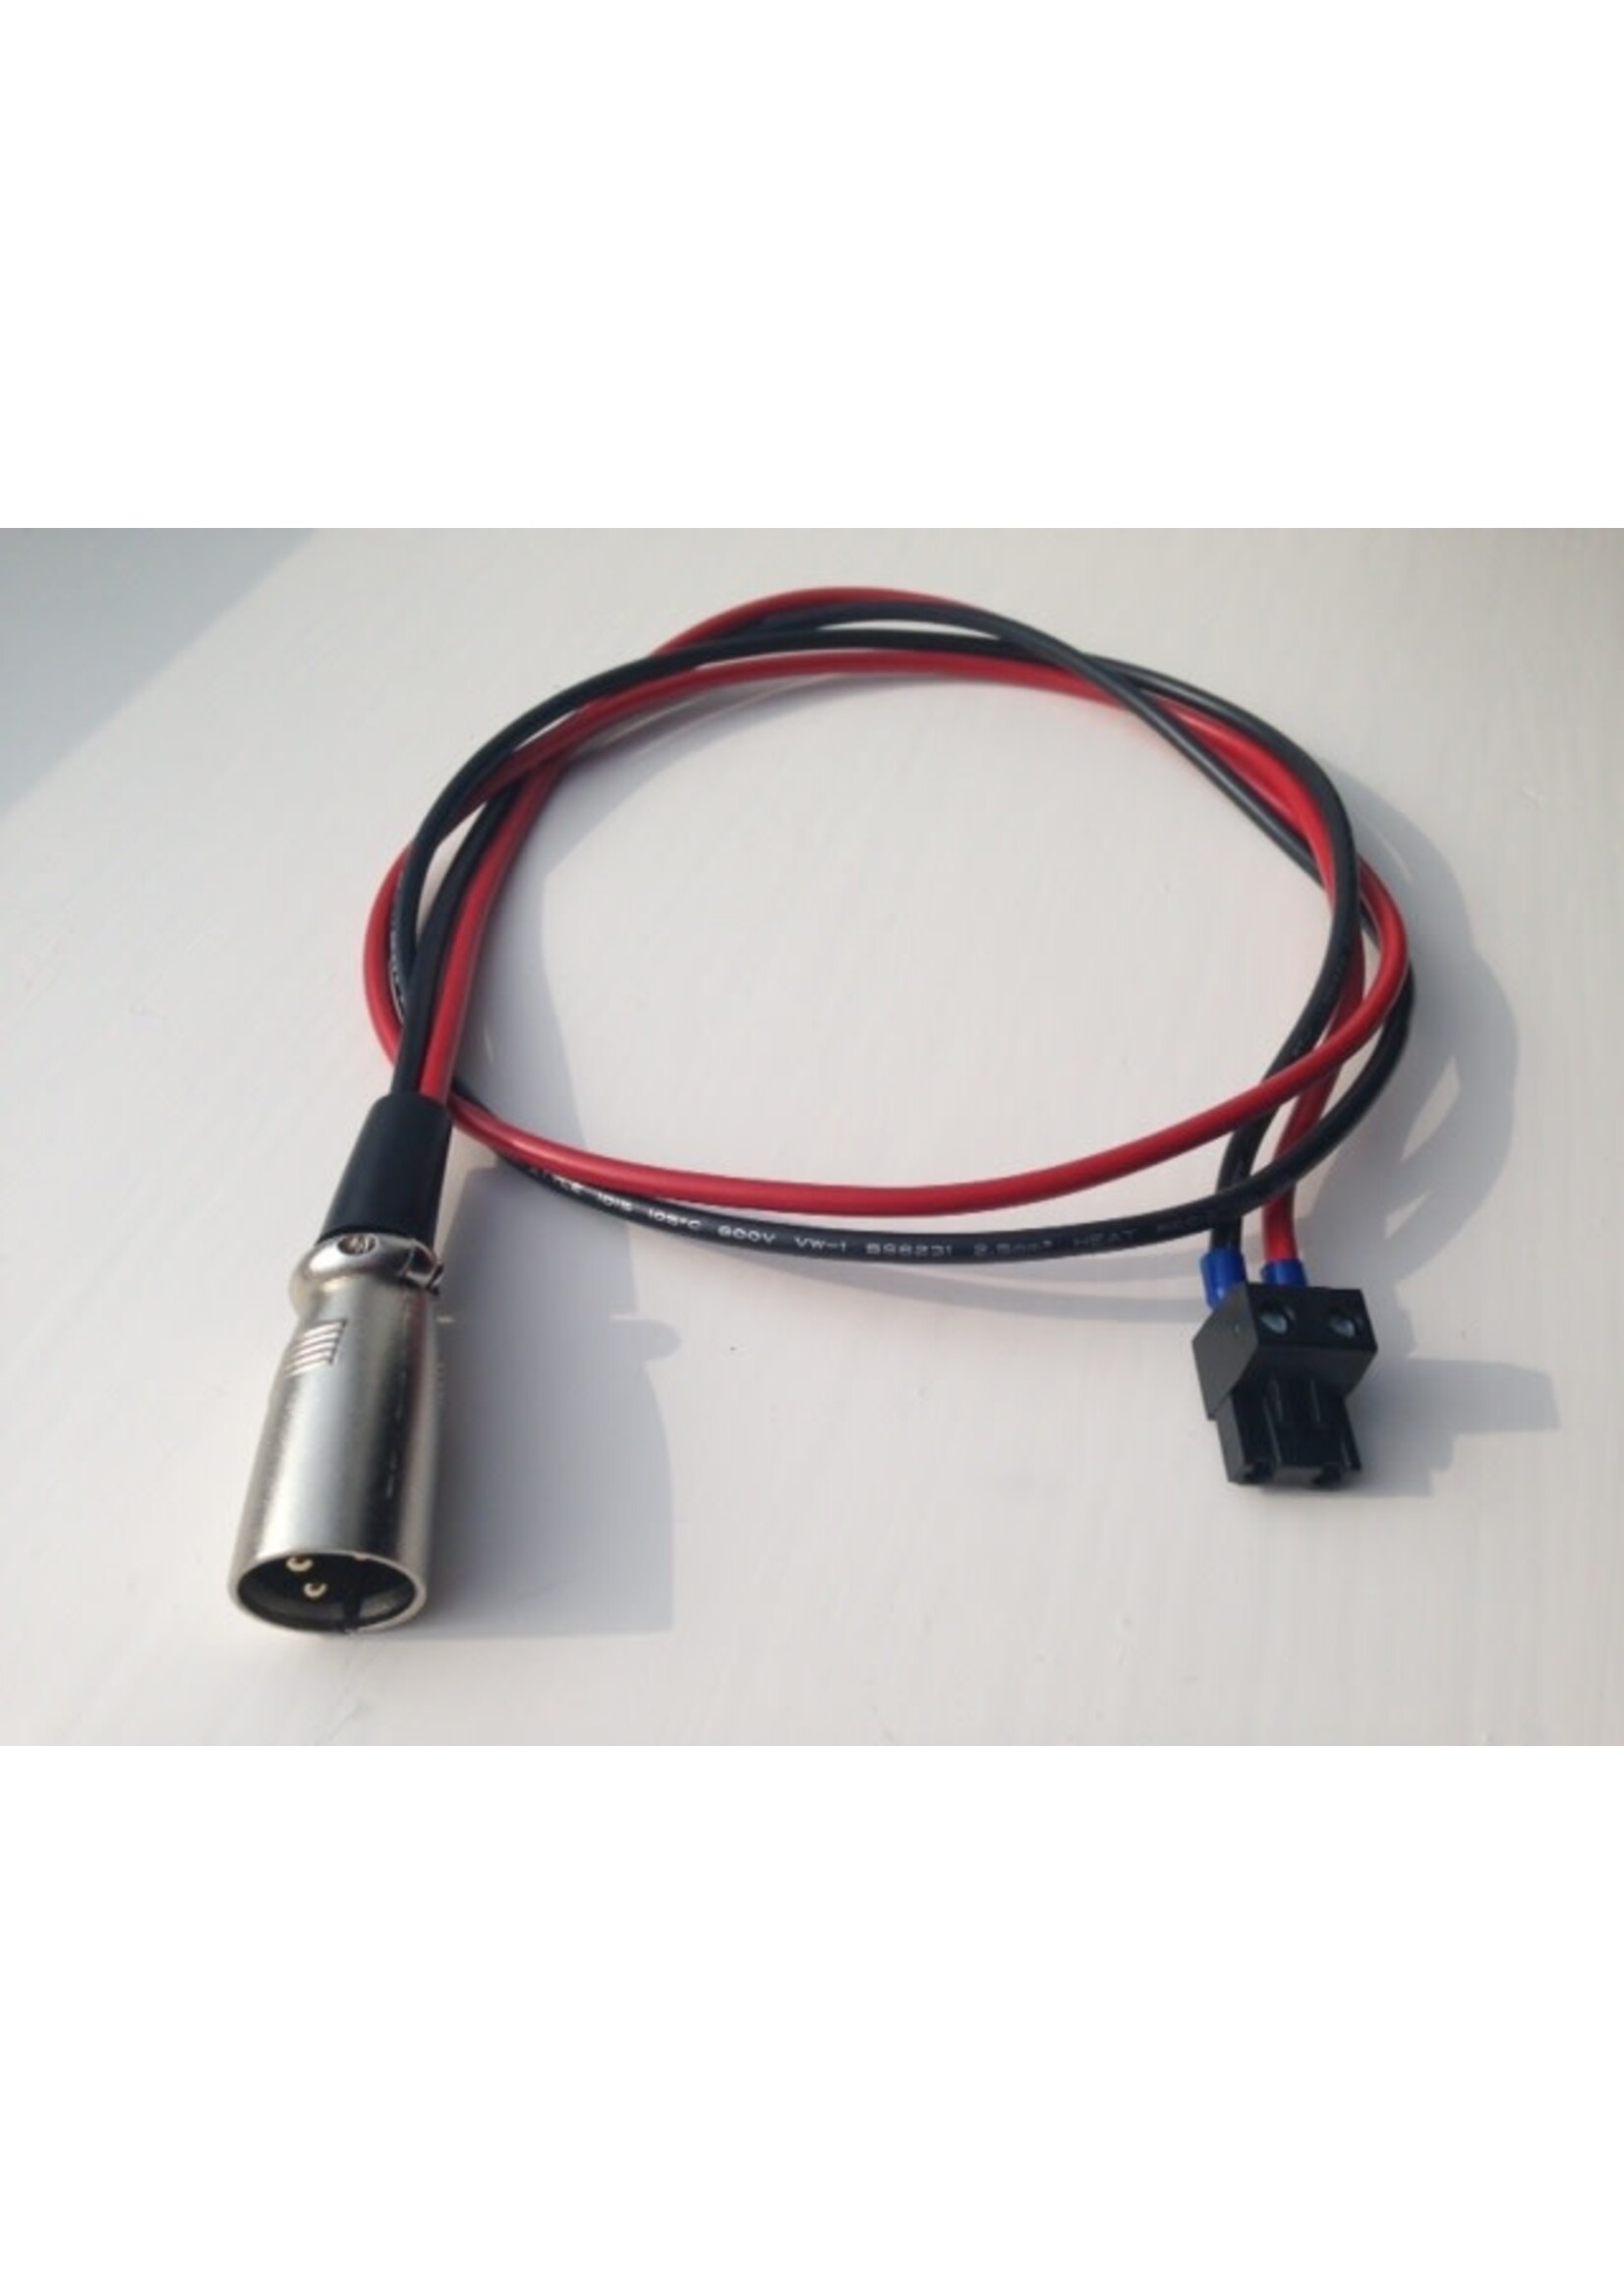 Batterytester Adapter Cable for smart adapters (included with a Batterytester)